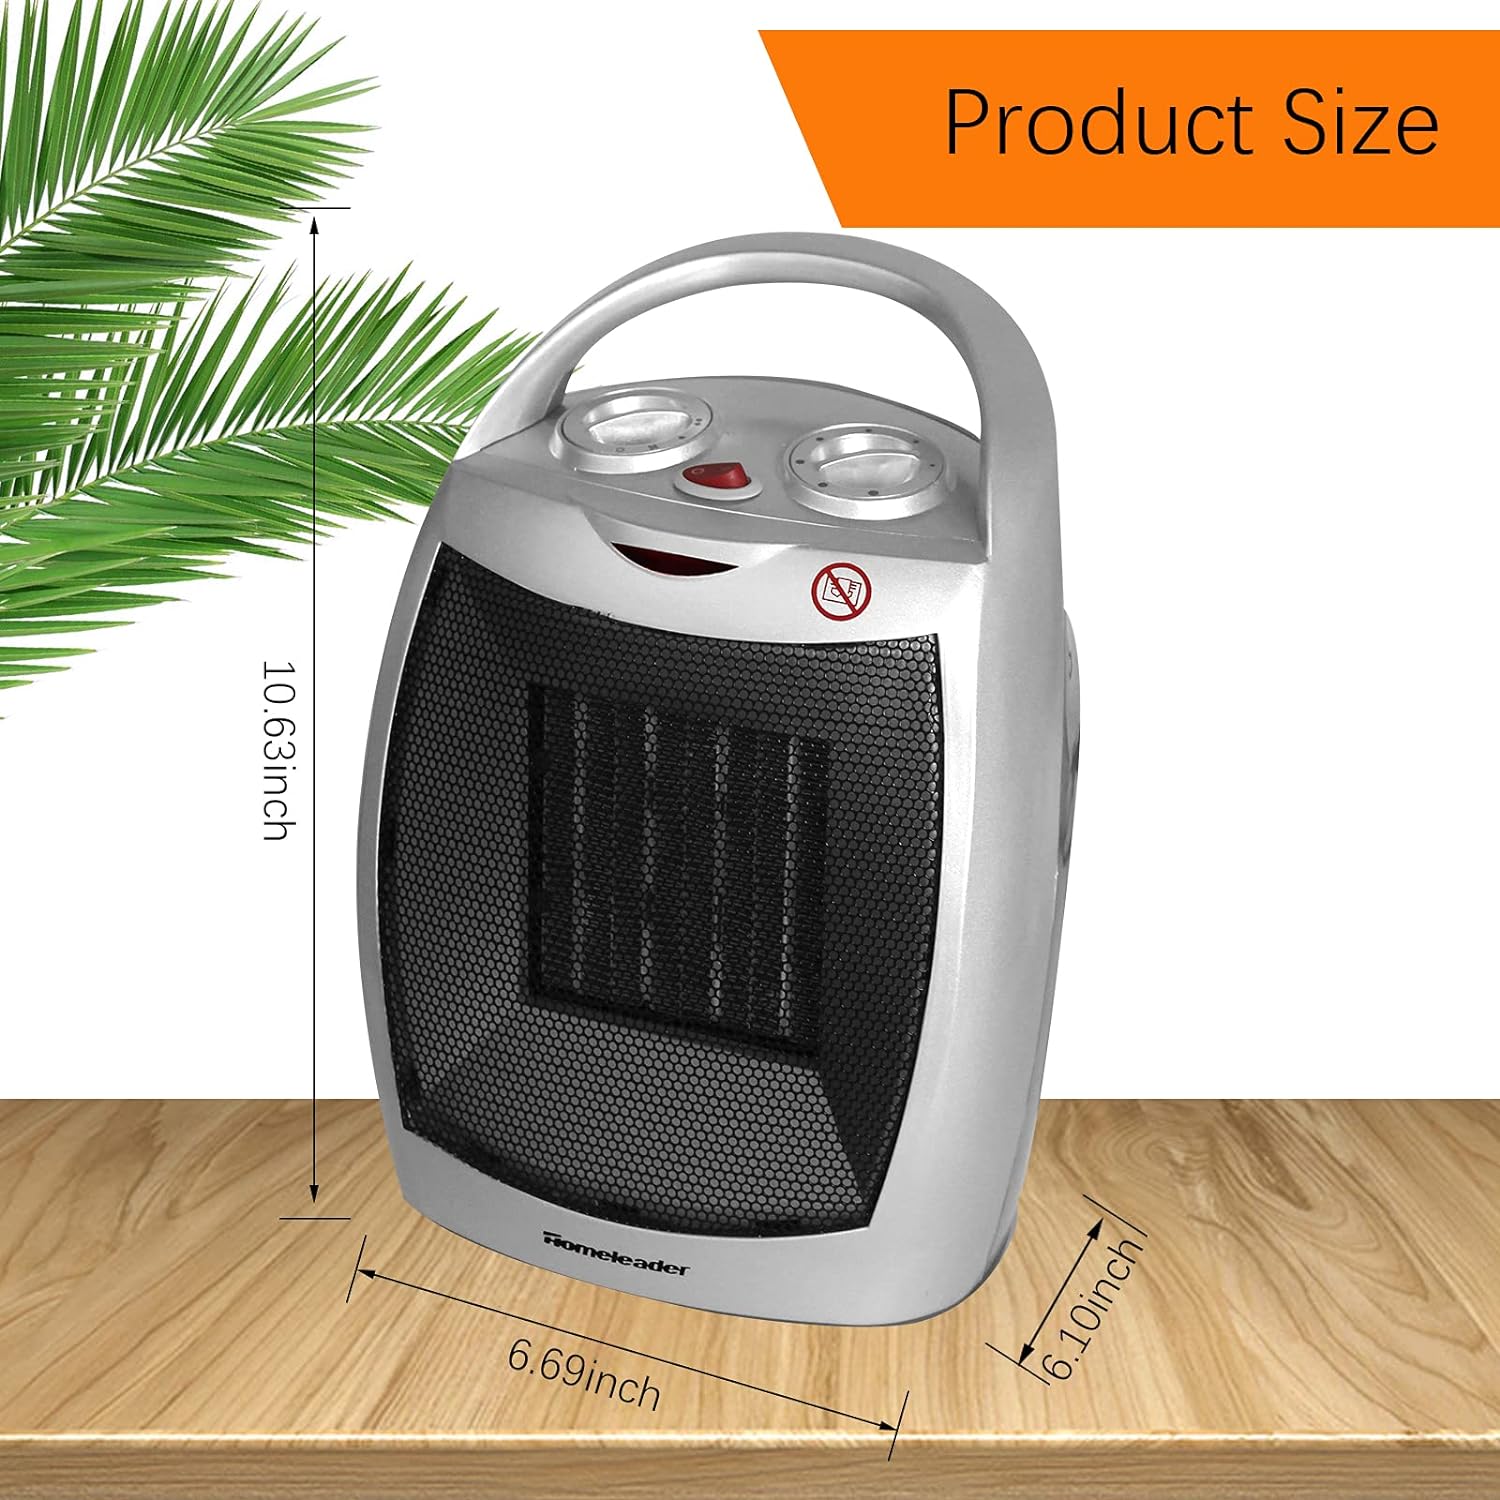 Homeleader Portable Space Heater, Electric Heater with Thermostat, Ceramic Small Heater with Carrying Handle and Tip Over Switch for Home and Office, 750W/1500W